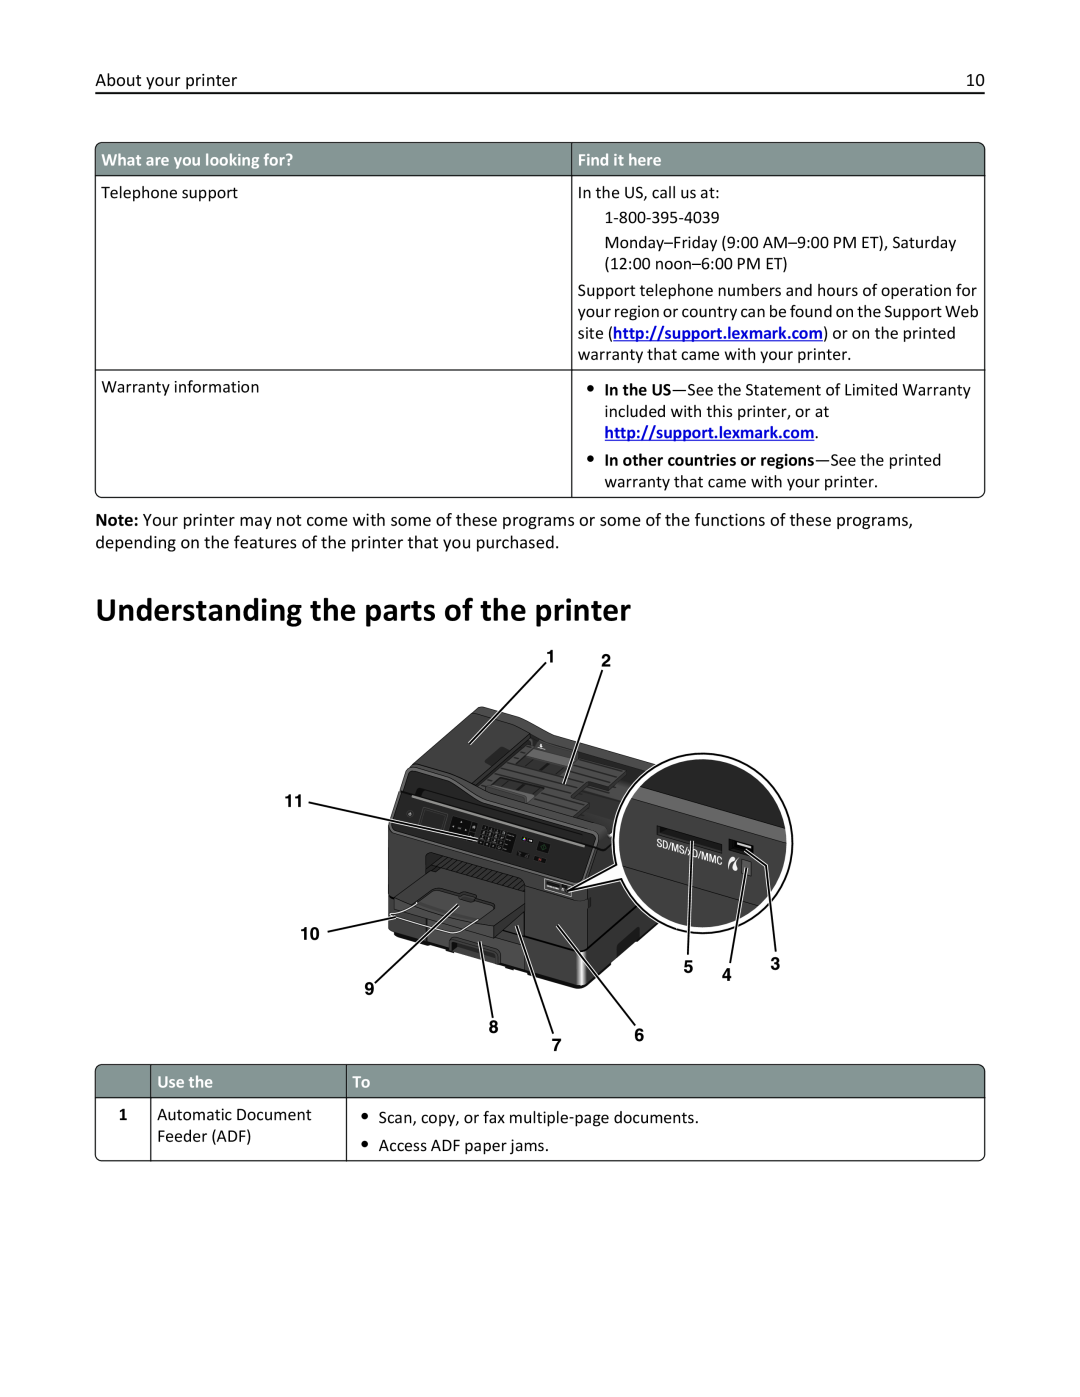 Lexmark PRO4000C, 90P3000 manual Understanding the parts of the printer, site http//support.lexmark.com or on the printed 